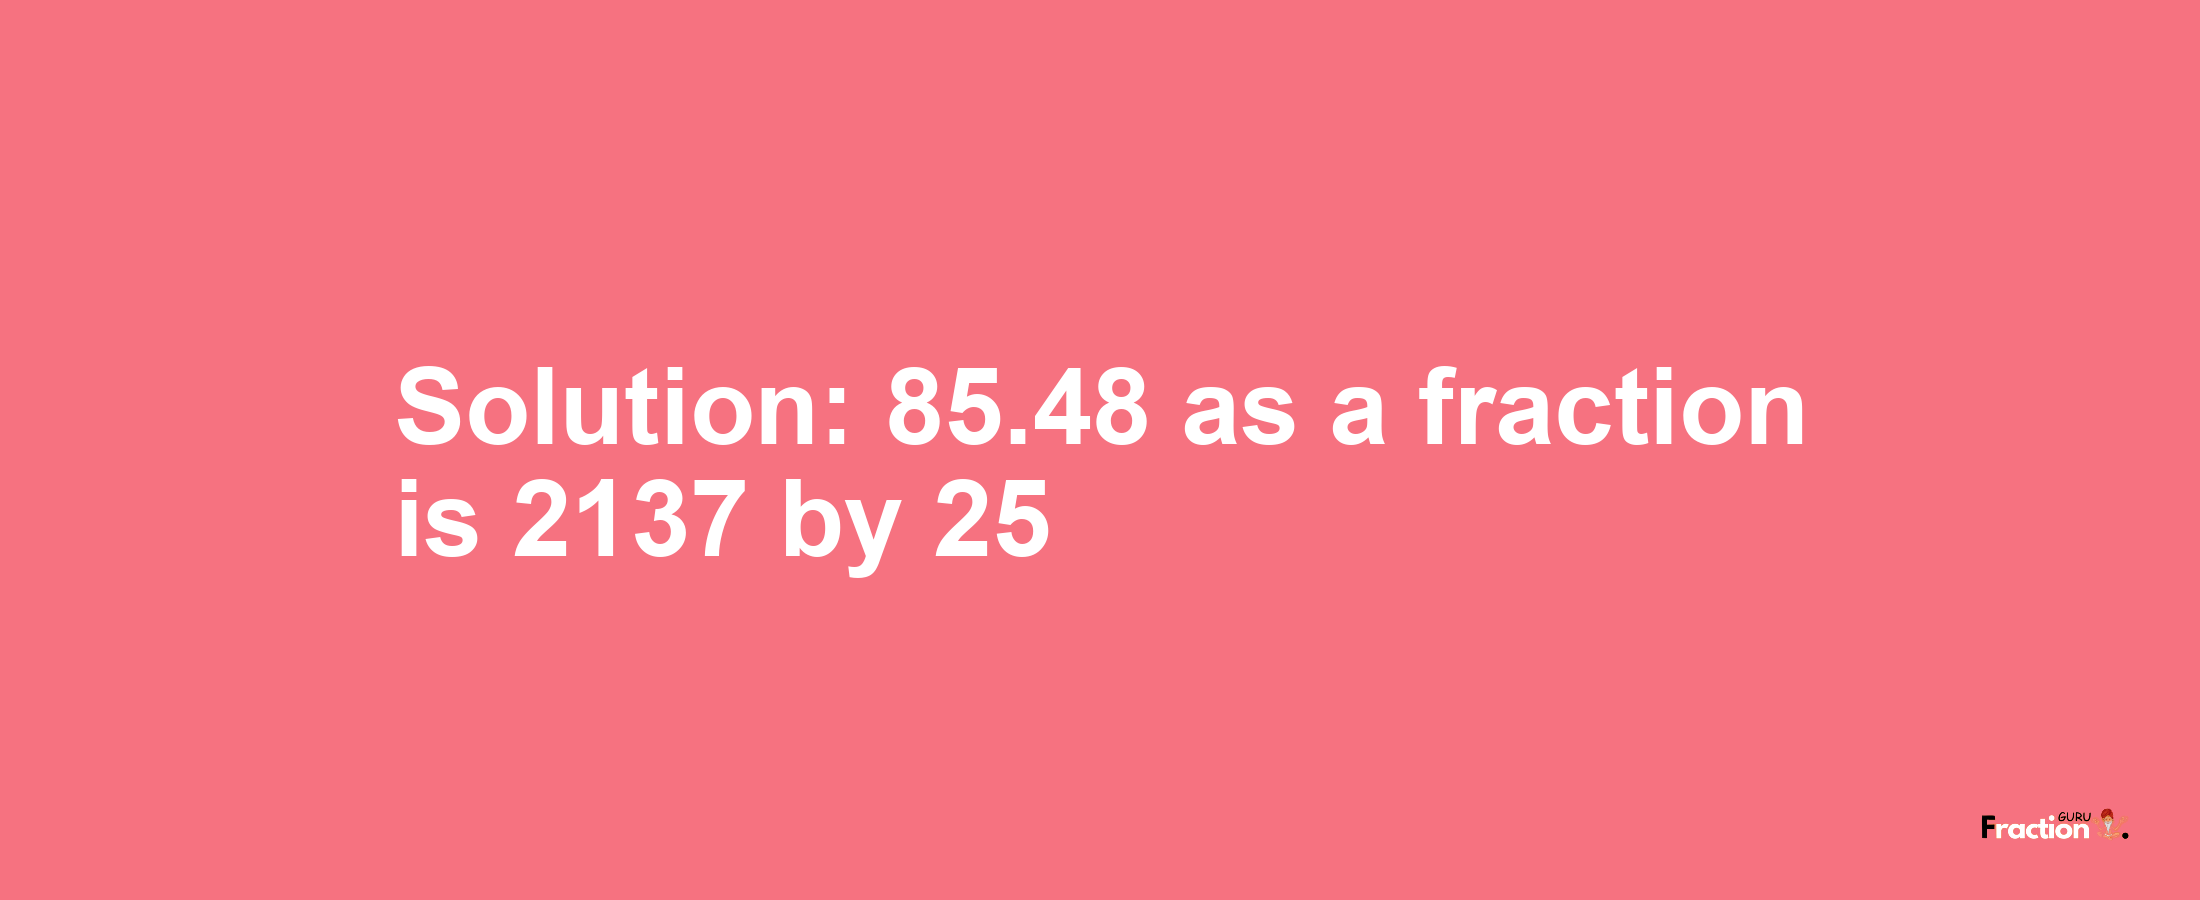 Solution:85.48 as a fraction is 2137/25